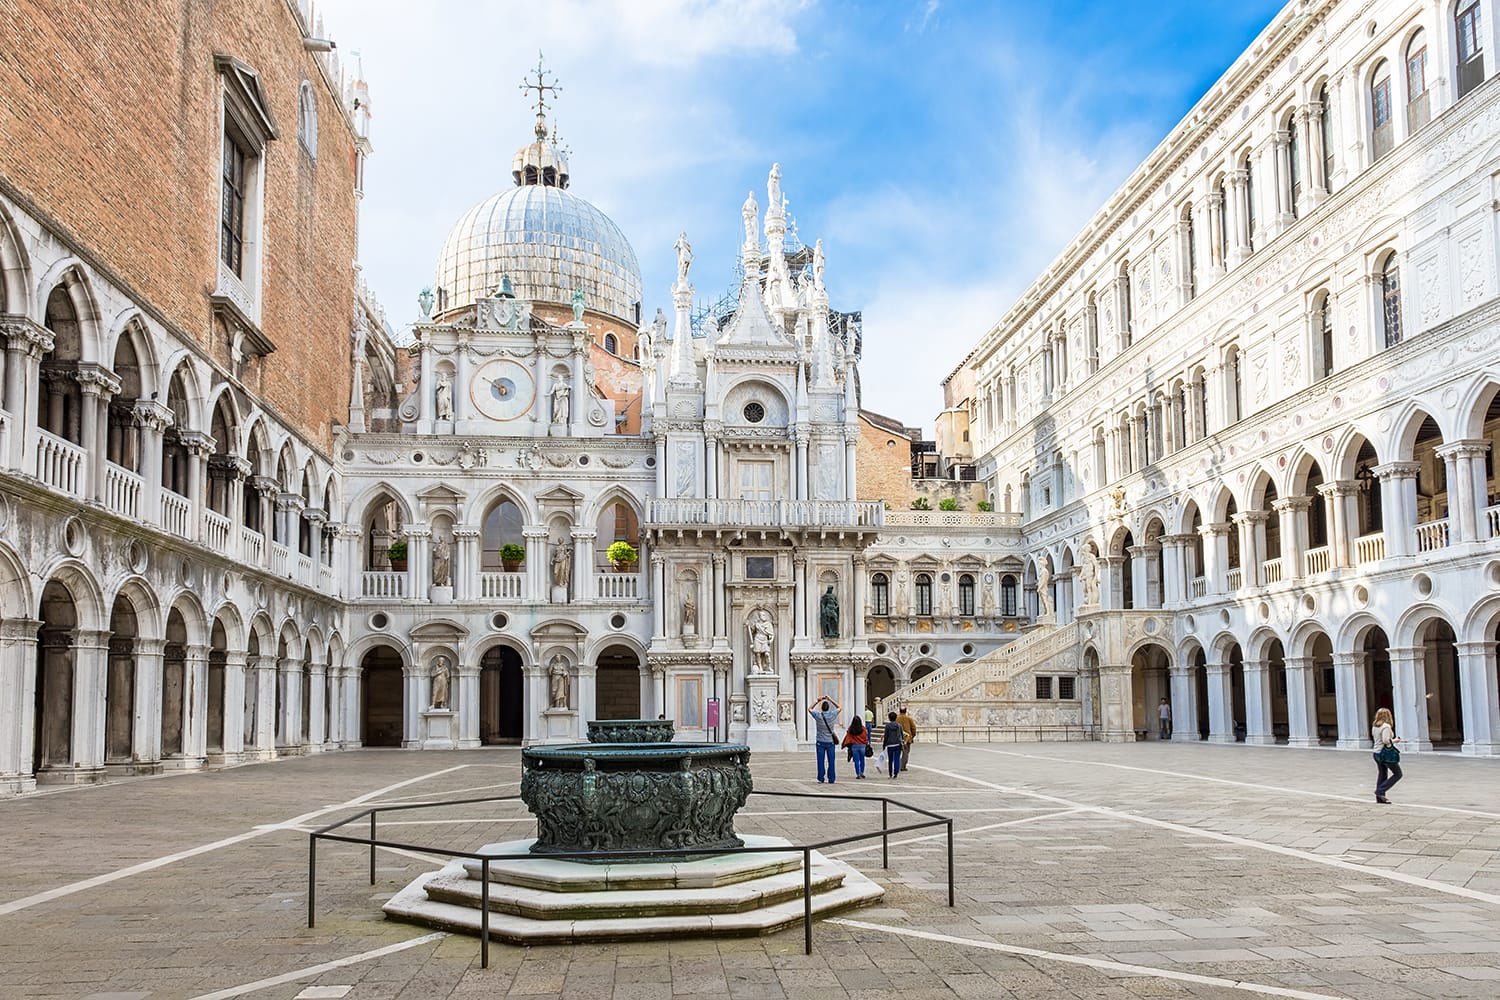 Courtyard of Doge's Palace (Palazzo Ducale) in Venice, Italy